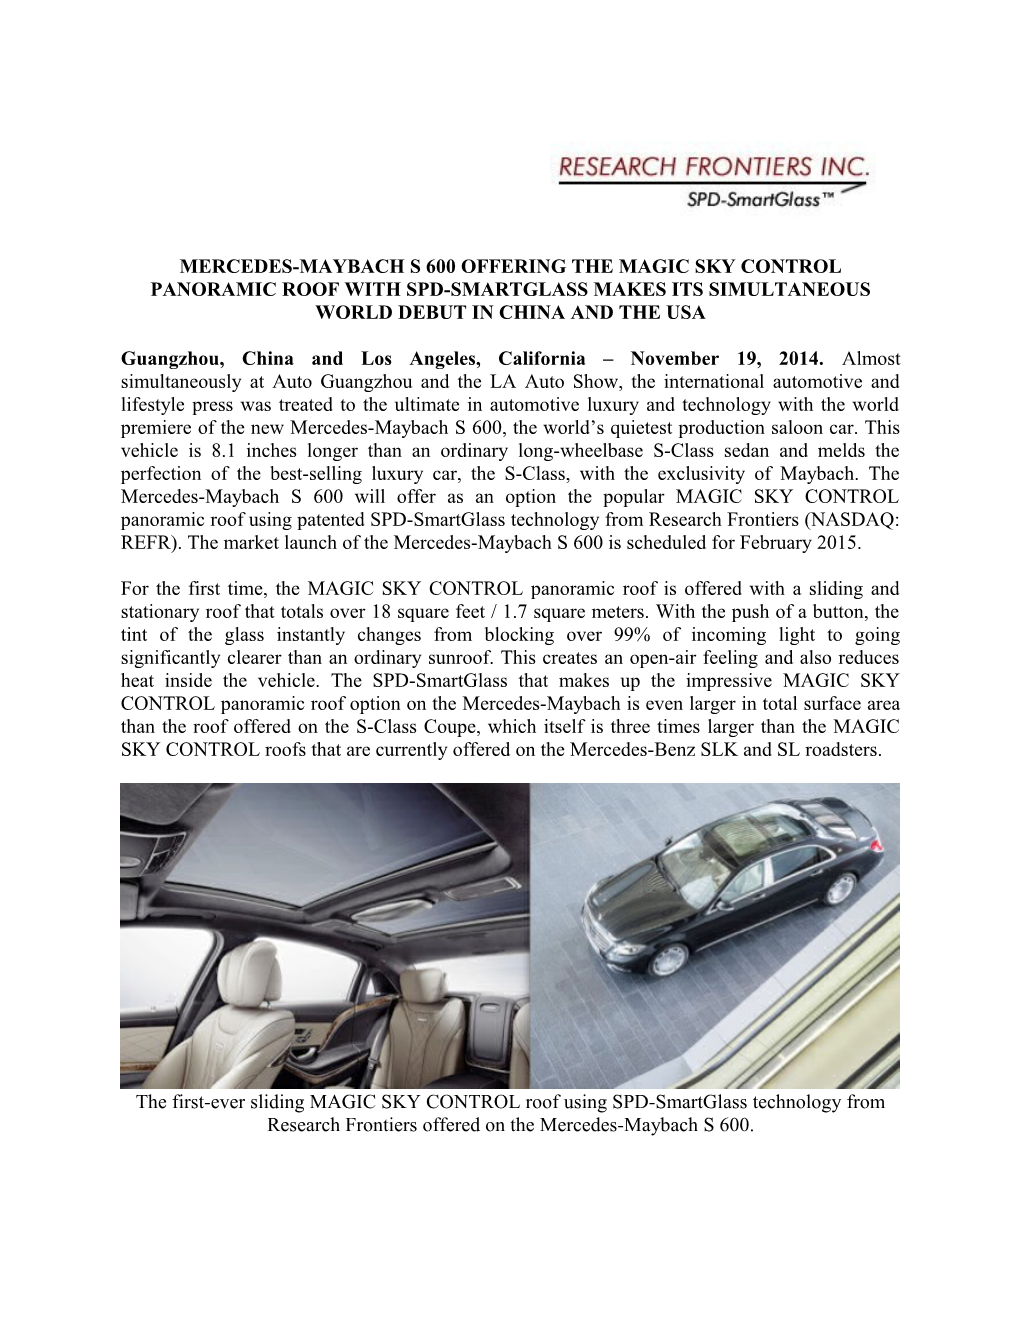 MERCEDES-Maybachs 600 OFFERING the MAGIC SKY CONTROL PANORAMIC ROOF with SPD-SMARTGLASS